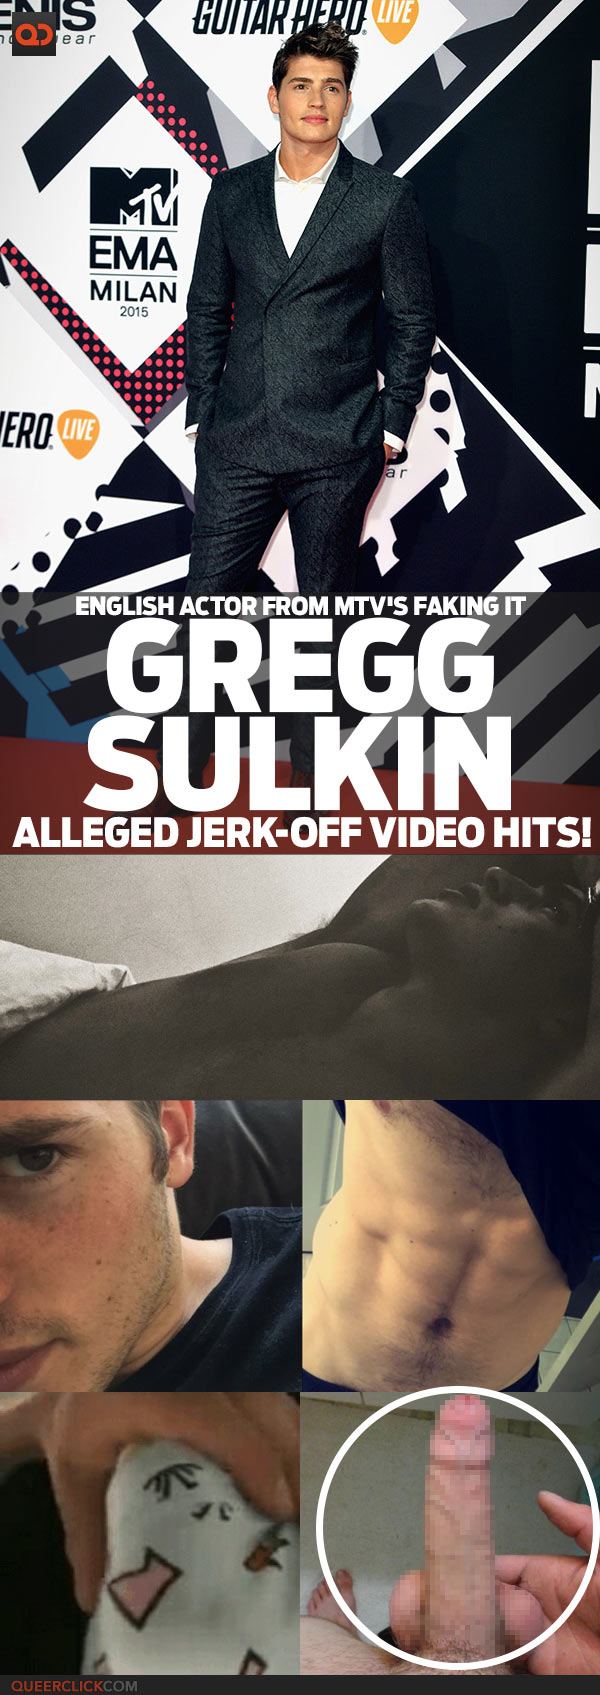 English Faking - Gregg Sulkin, English Actor From MTV's Faking It, Alleged Jerk-Off Video  Hits! - QueerClick